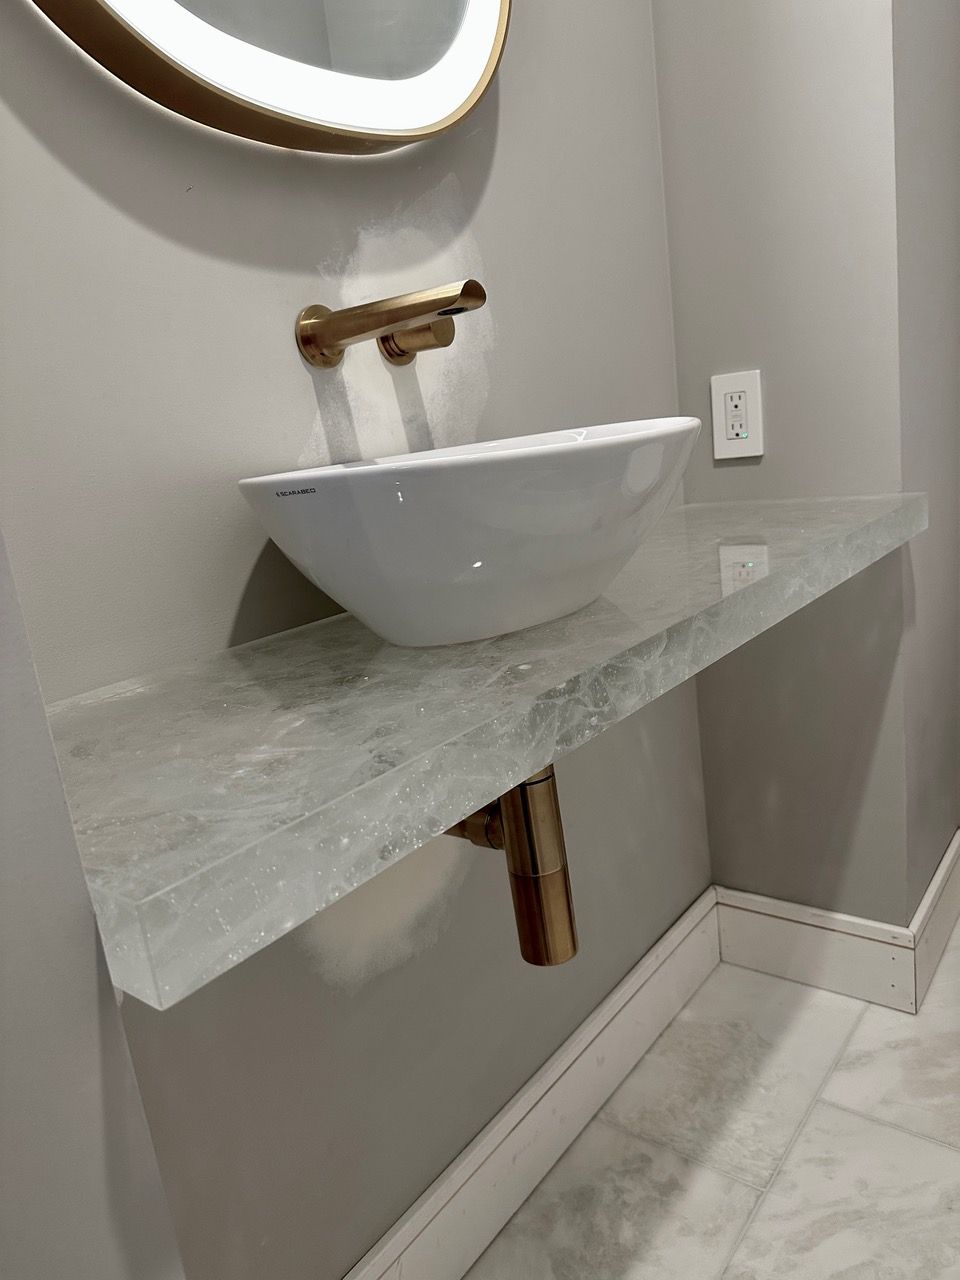 Bathroom countertop installation using ThickGlass™ in Smoke from TCG Glass.